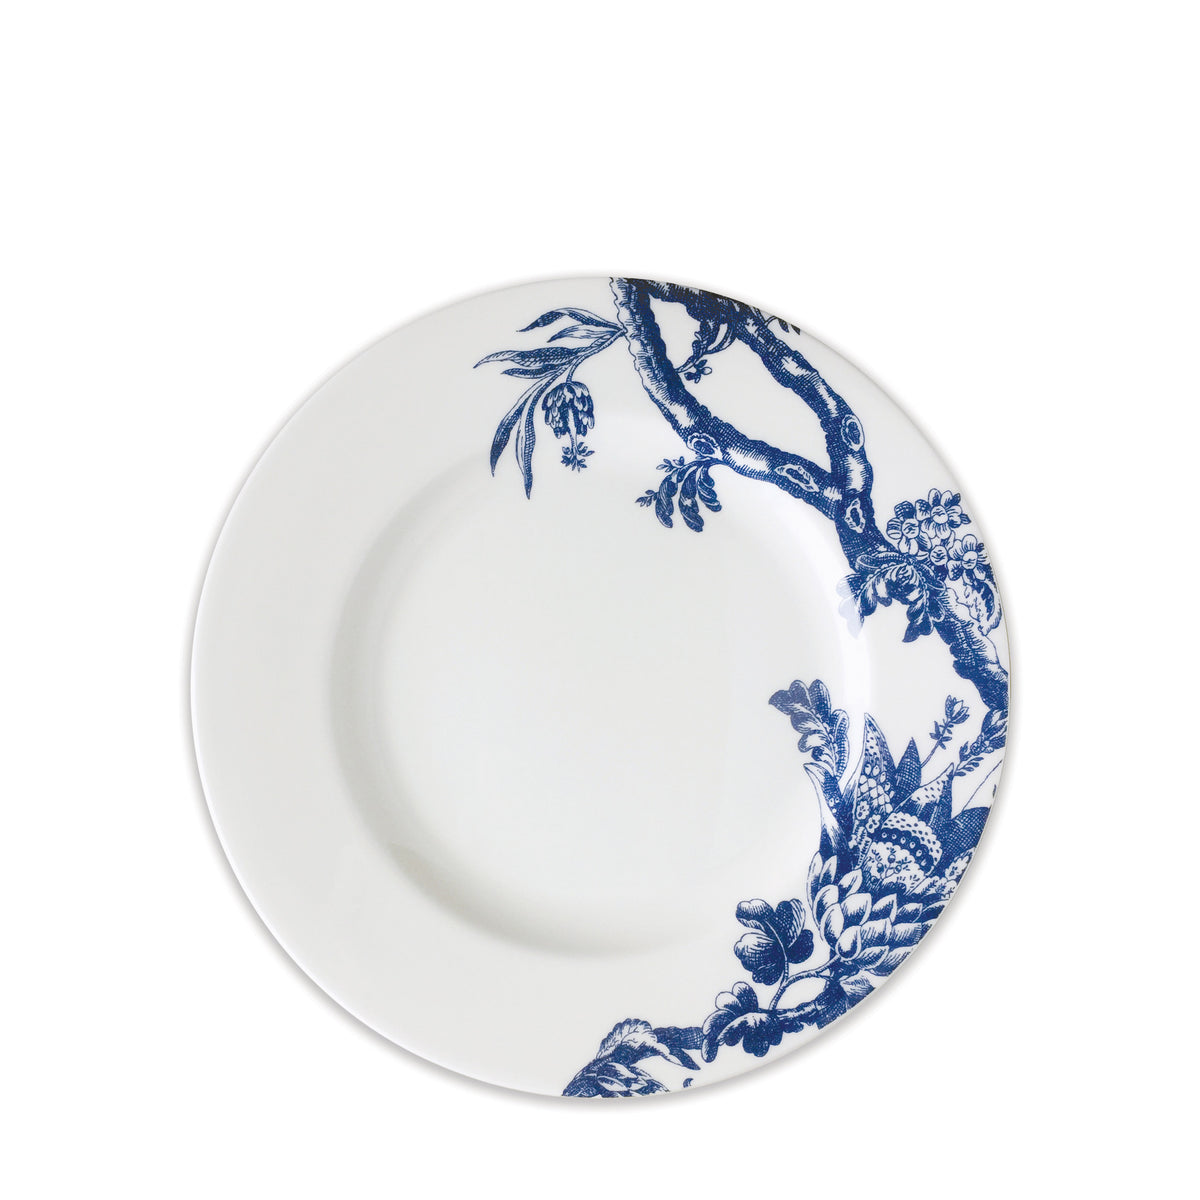 A white ceramic plate with a blue floral and branch design along the rim, this premium porcelain Arcadia Rimmed Salad Plate is part of the exquisite Caskata Artisanal Home dinnerware collection.